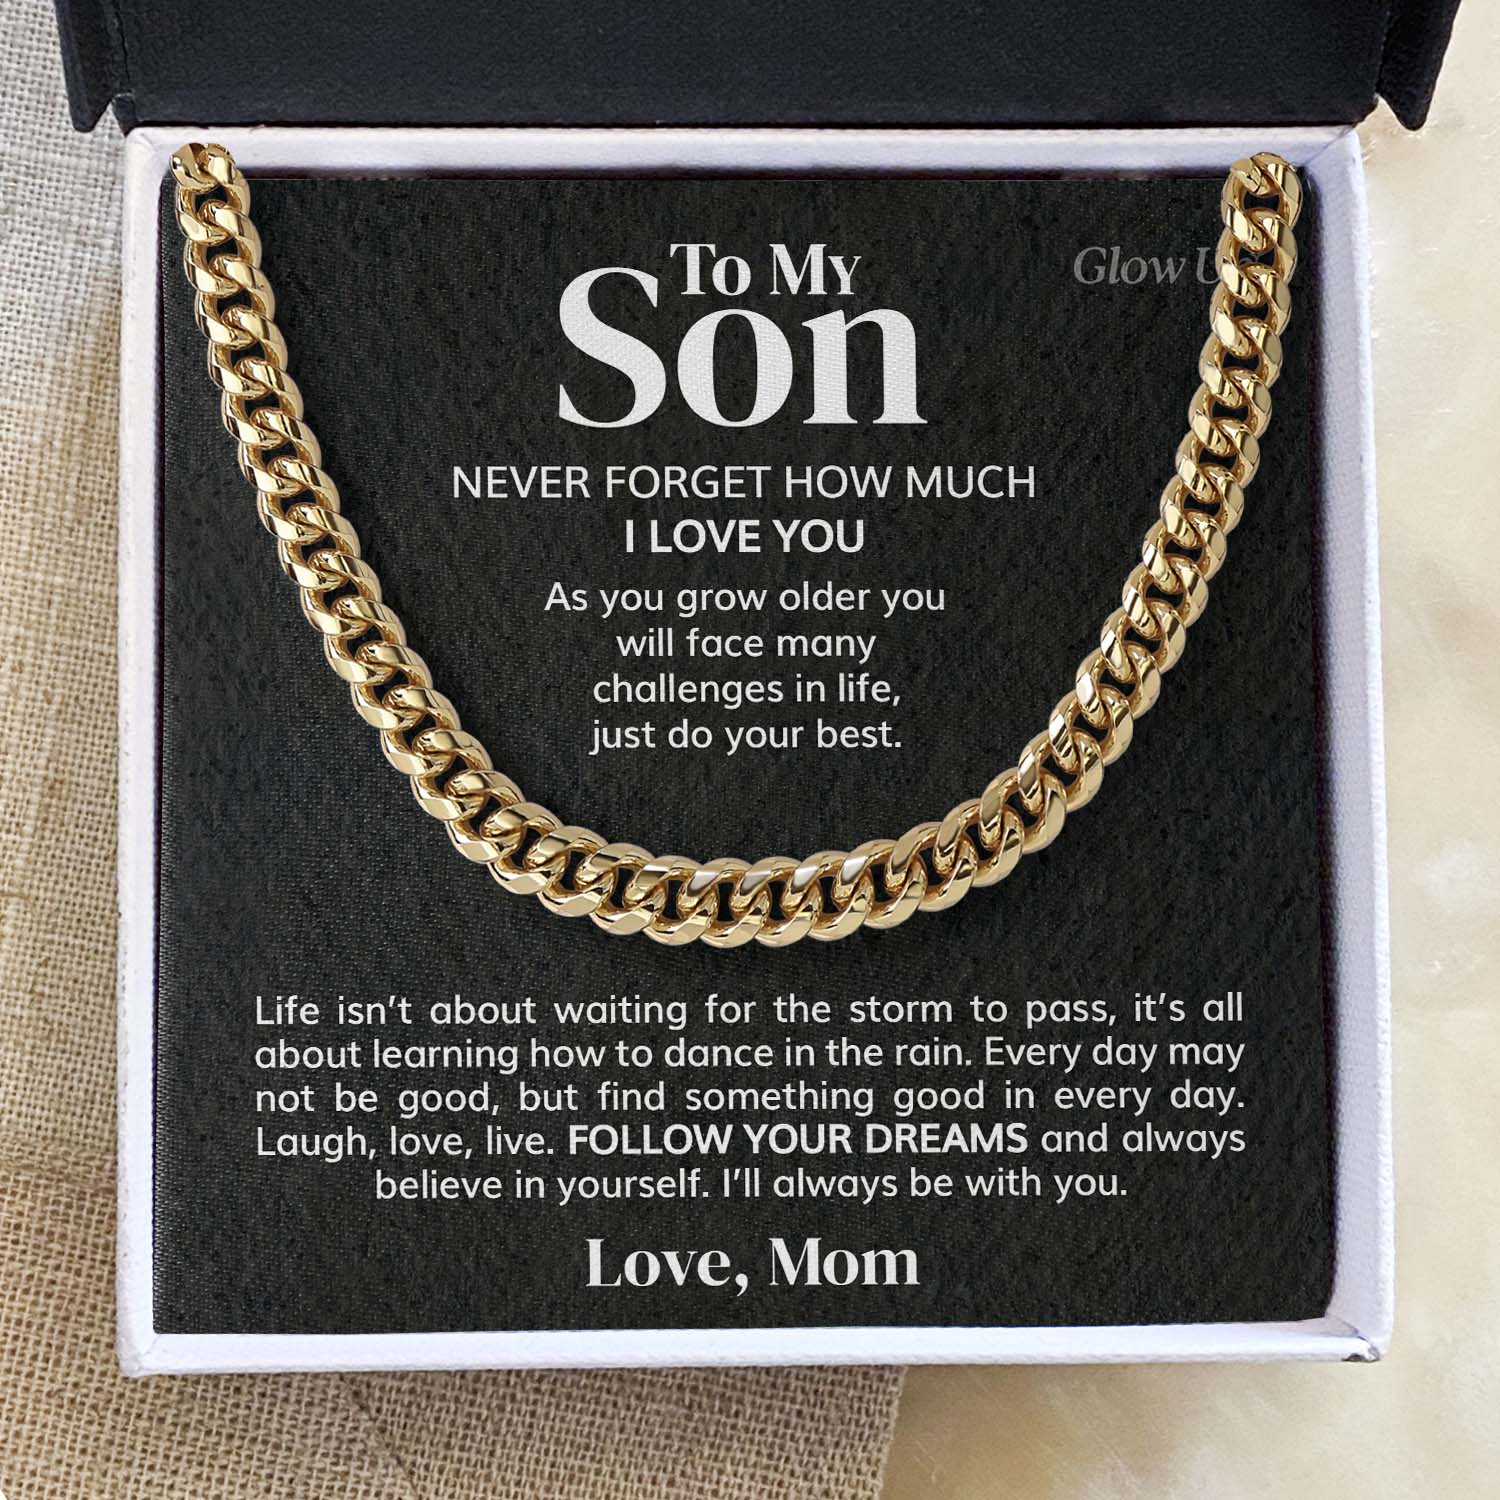 ShineOn Fulfillment Jewelry 14K Yellow Gold Finish / Two-Toned Box To my Son - Never forget - Cuban Link Chain